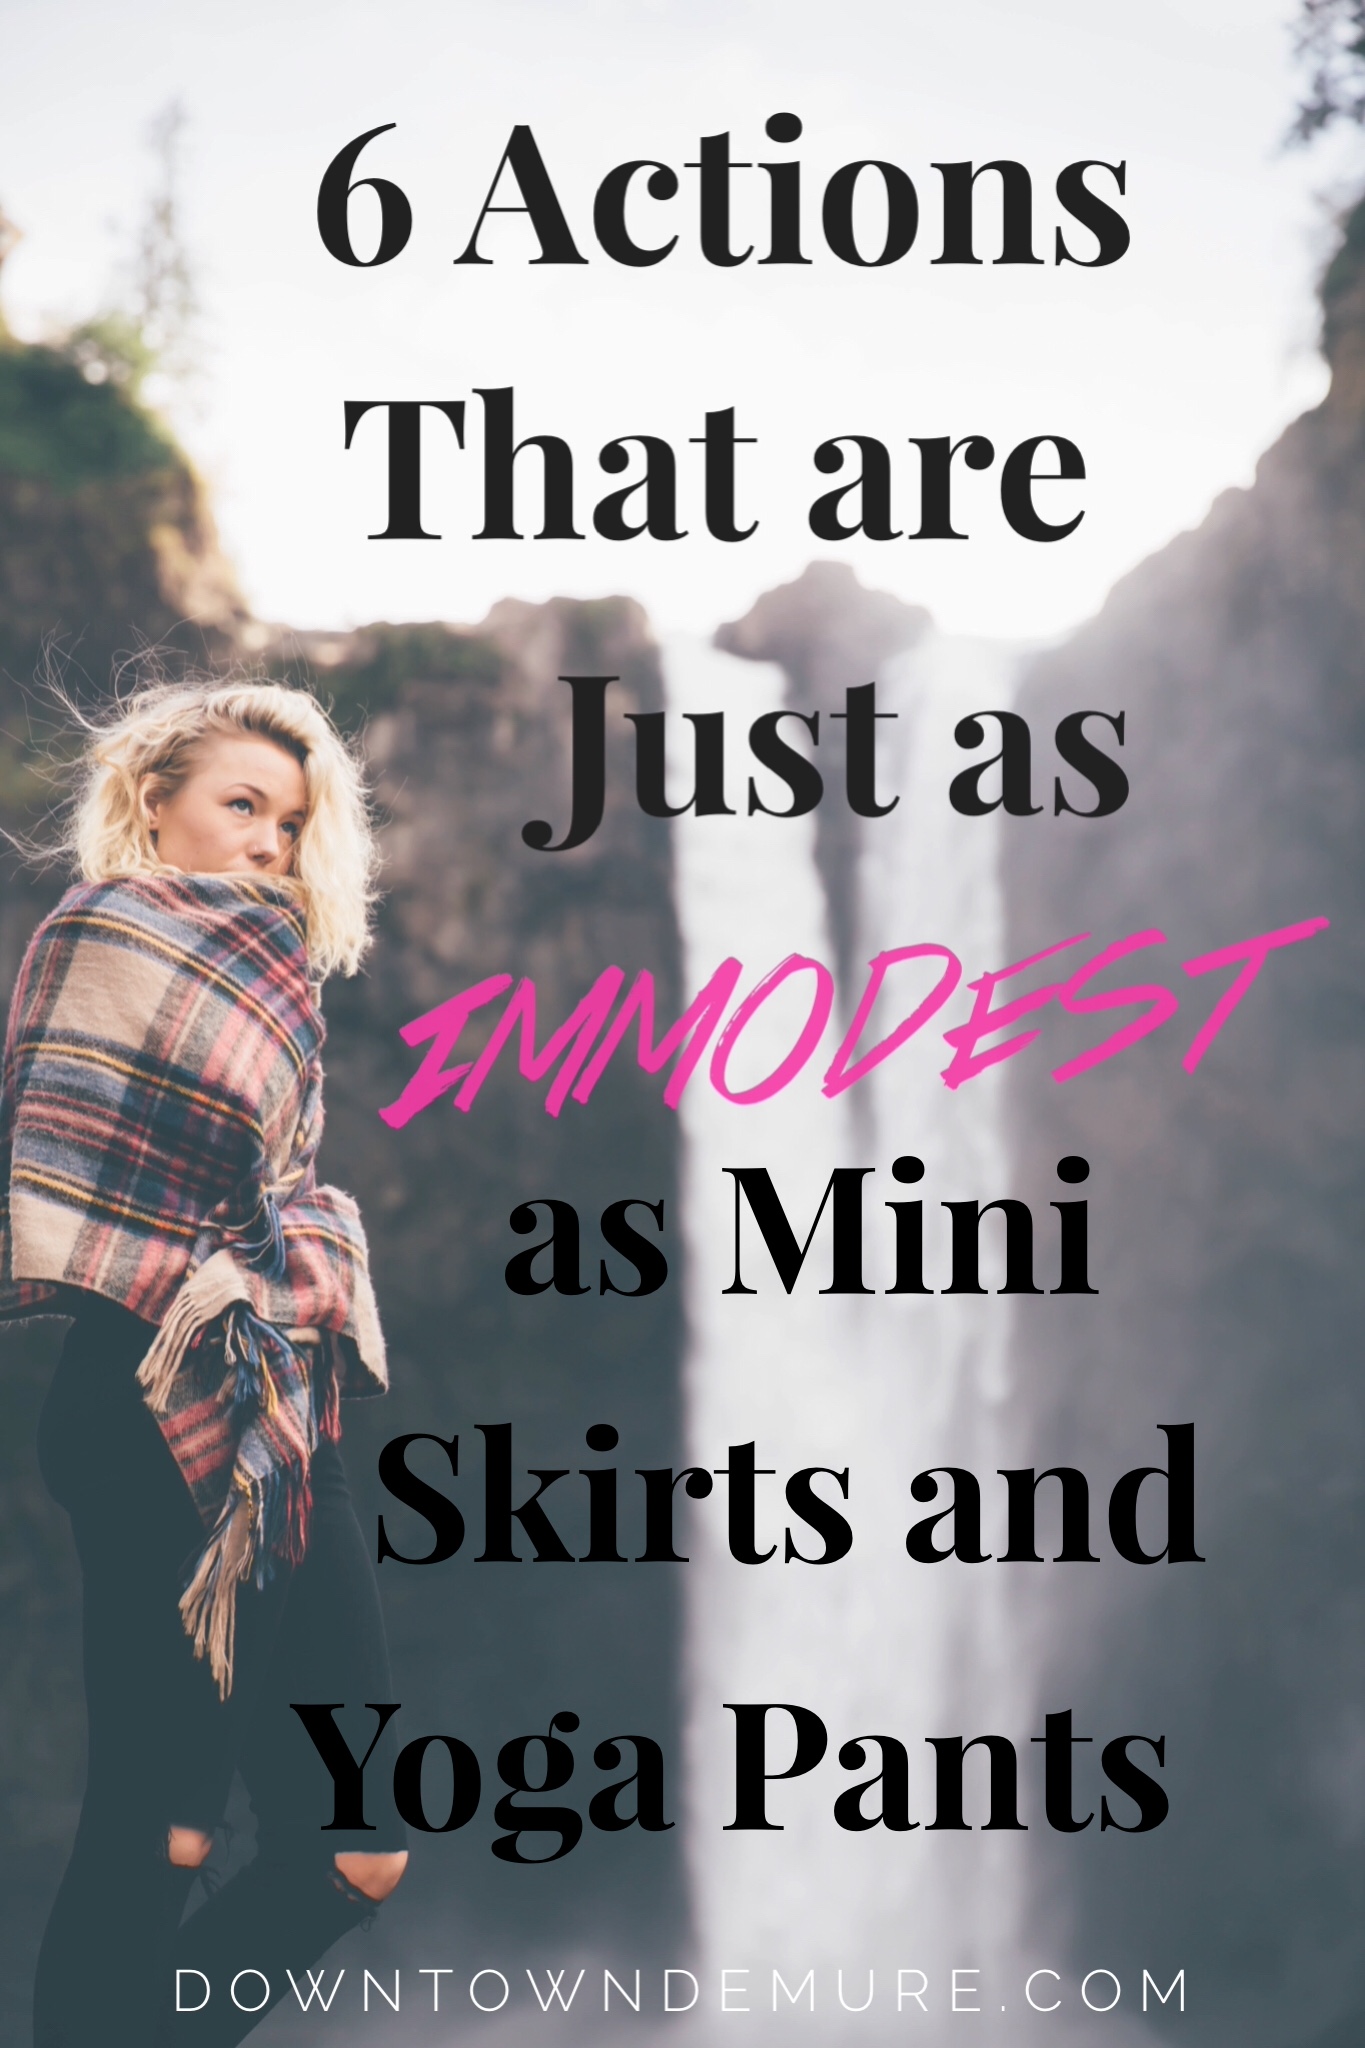 6 Actions That Are Just As Immodest As Mini Skirts and Yoga Pants - Dowtown Demure